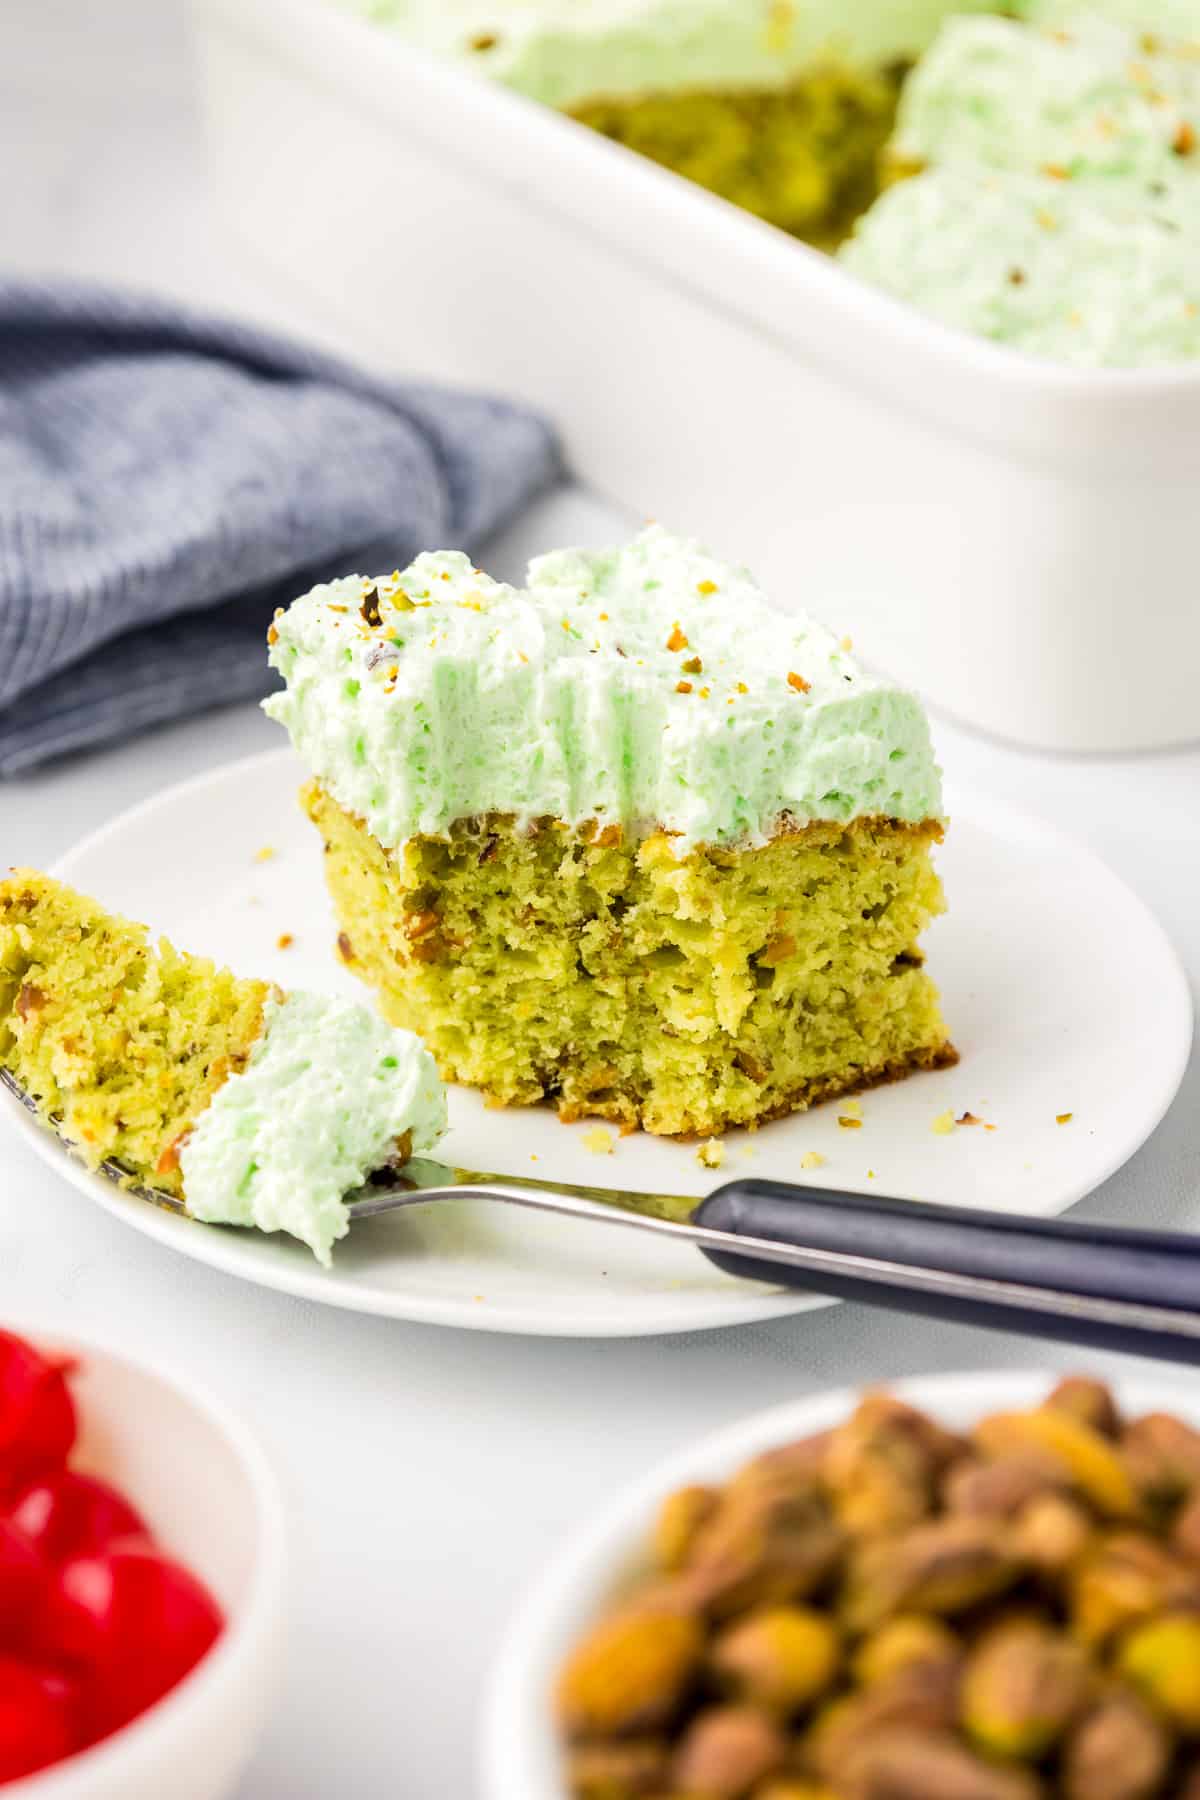 A slice of green pistachio cake topped with green frosting and chopped nuts on a plate.